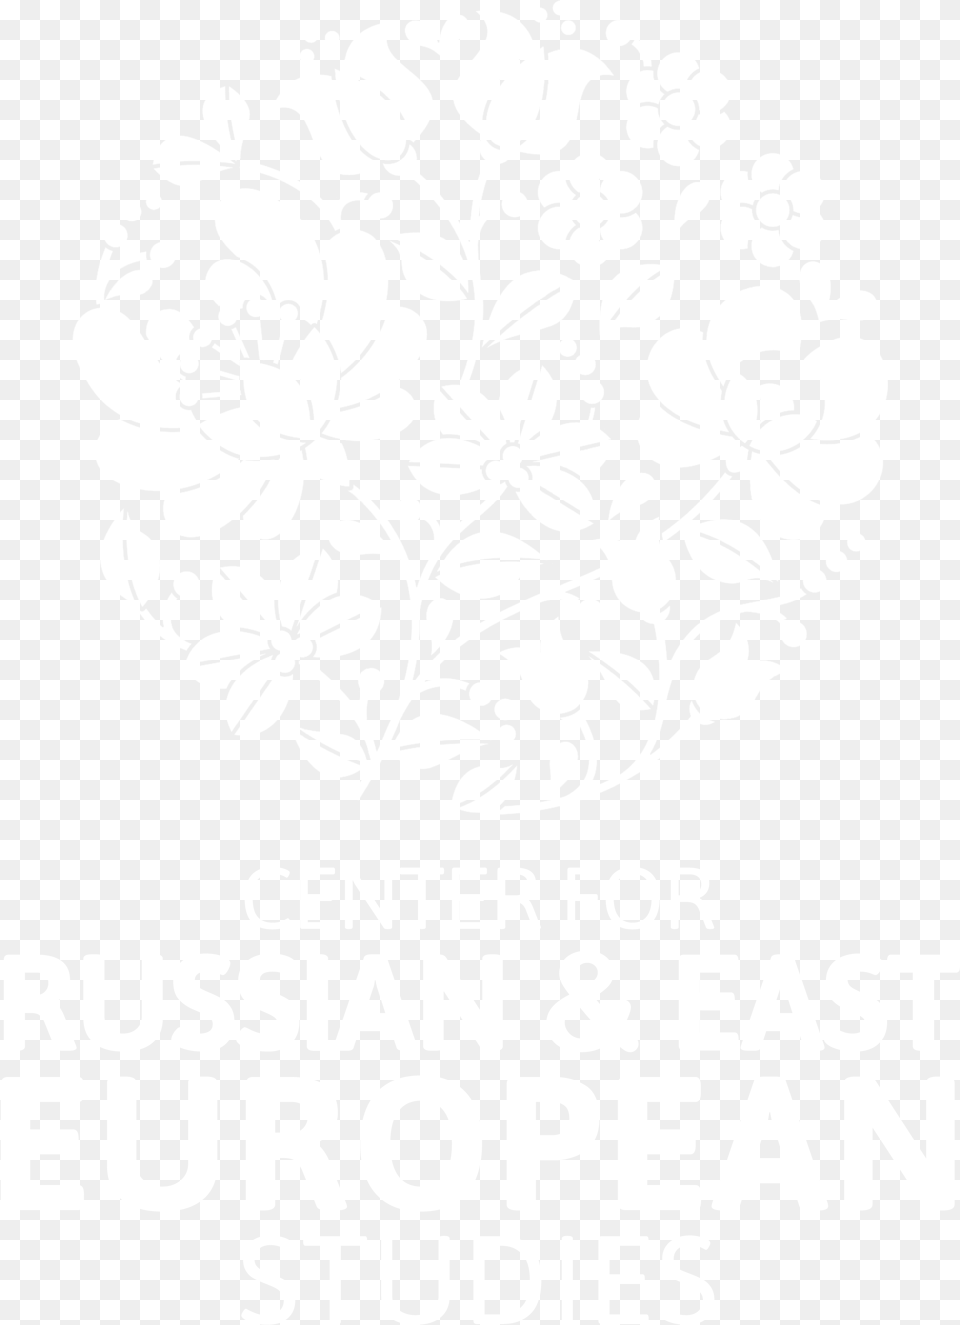 Rees Logo Vertical White Black And White Embroidery Designs, Art, Floral Design, Graphics, Pattern Png Image